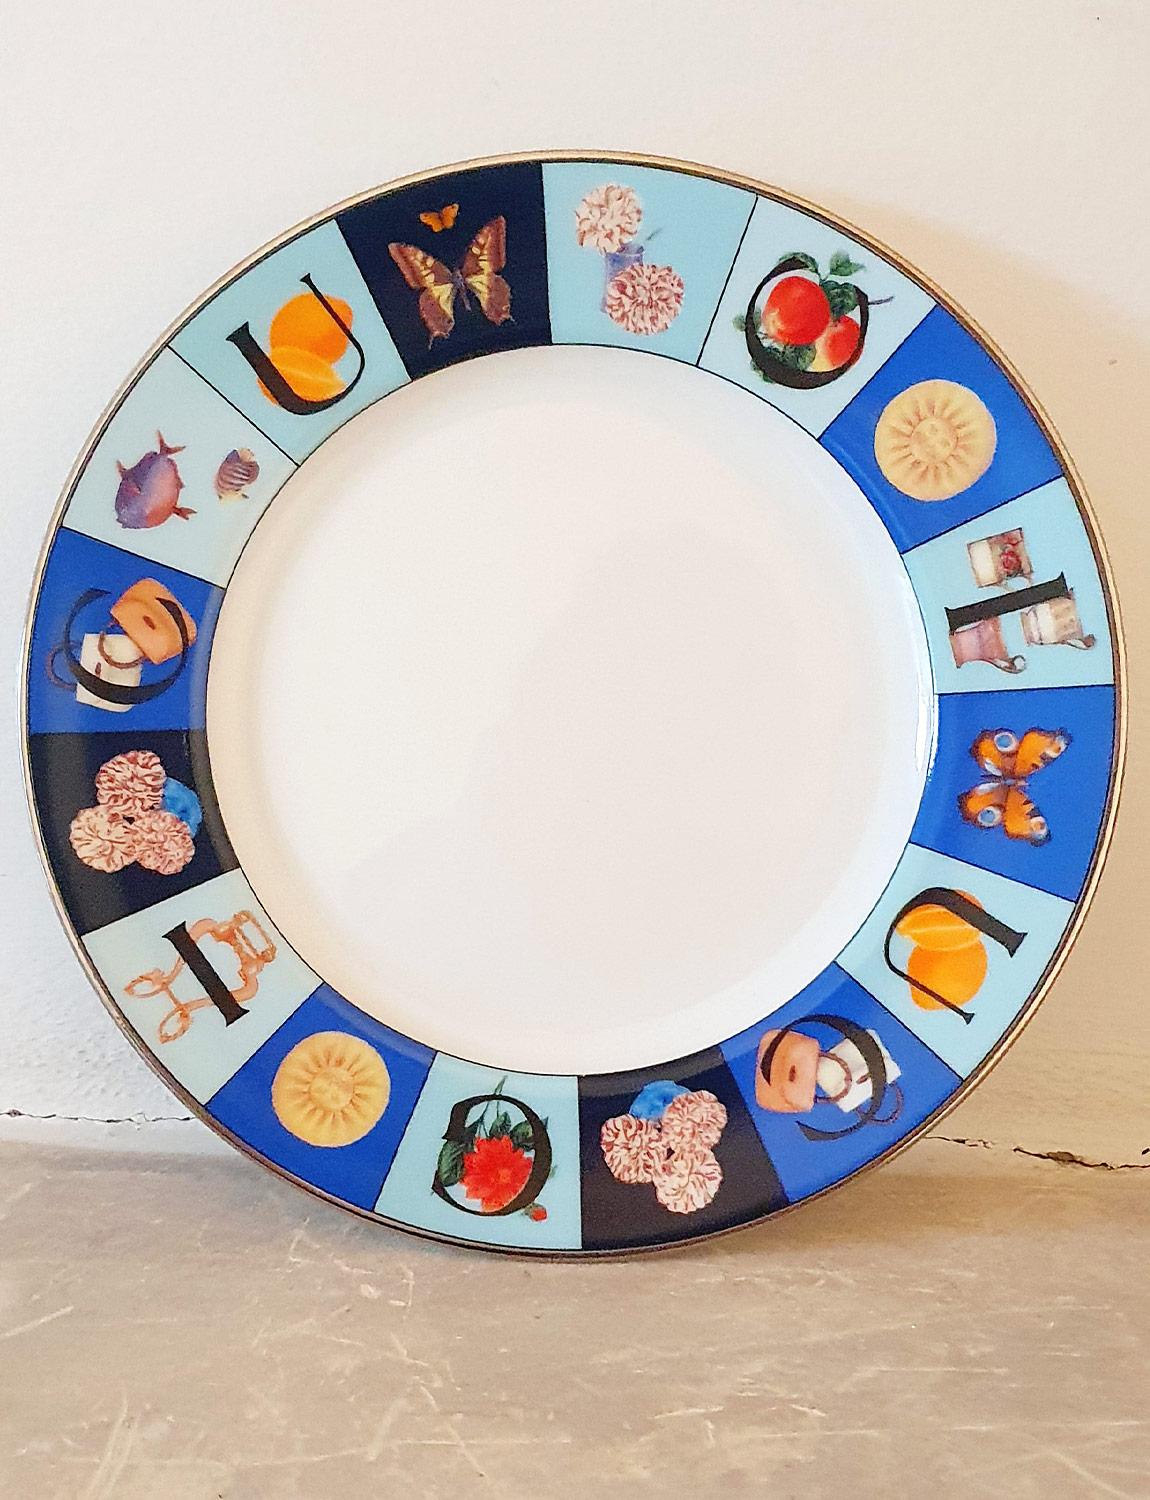 A set of 12 Gucci plates each with a diameter of 22cm in perfect condition in their original Gucci box. The plates were part of the 1980s Guccissimo range and are decorated in shades of blue around the rim, the letters spelling G U C C I and with